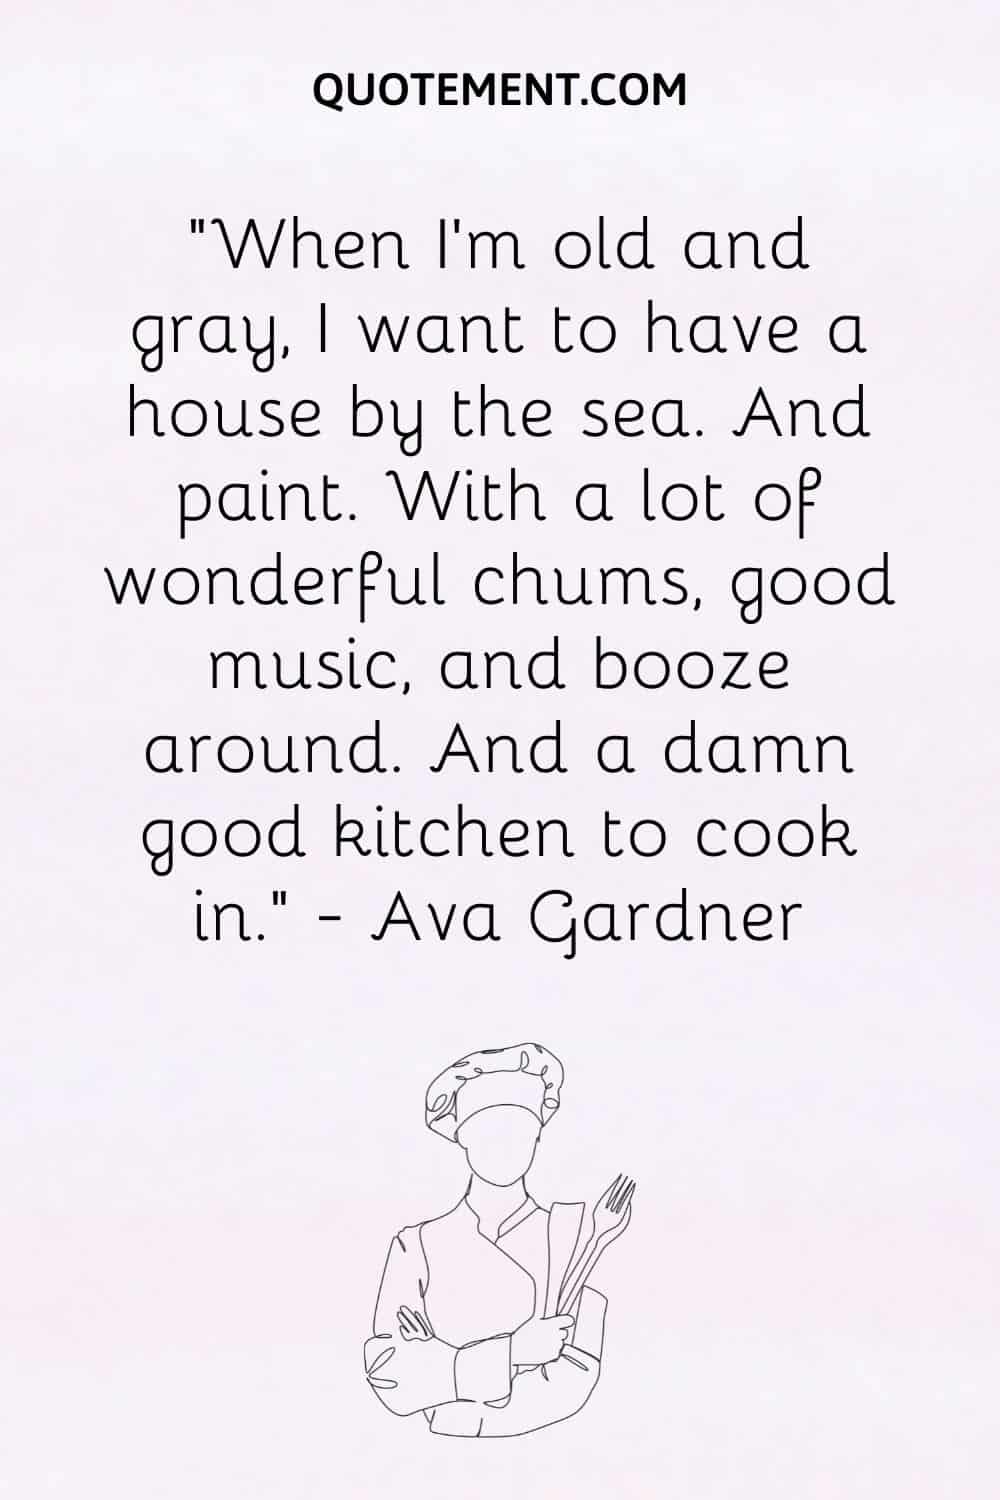 When I’m old and gray, I want to have a house by the sea